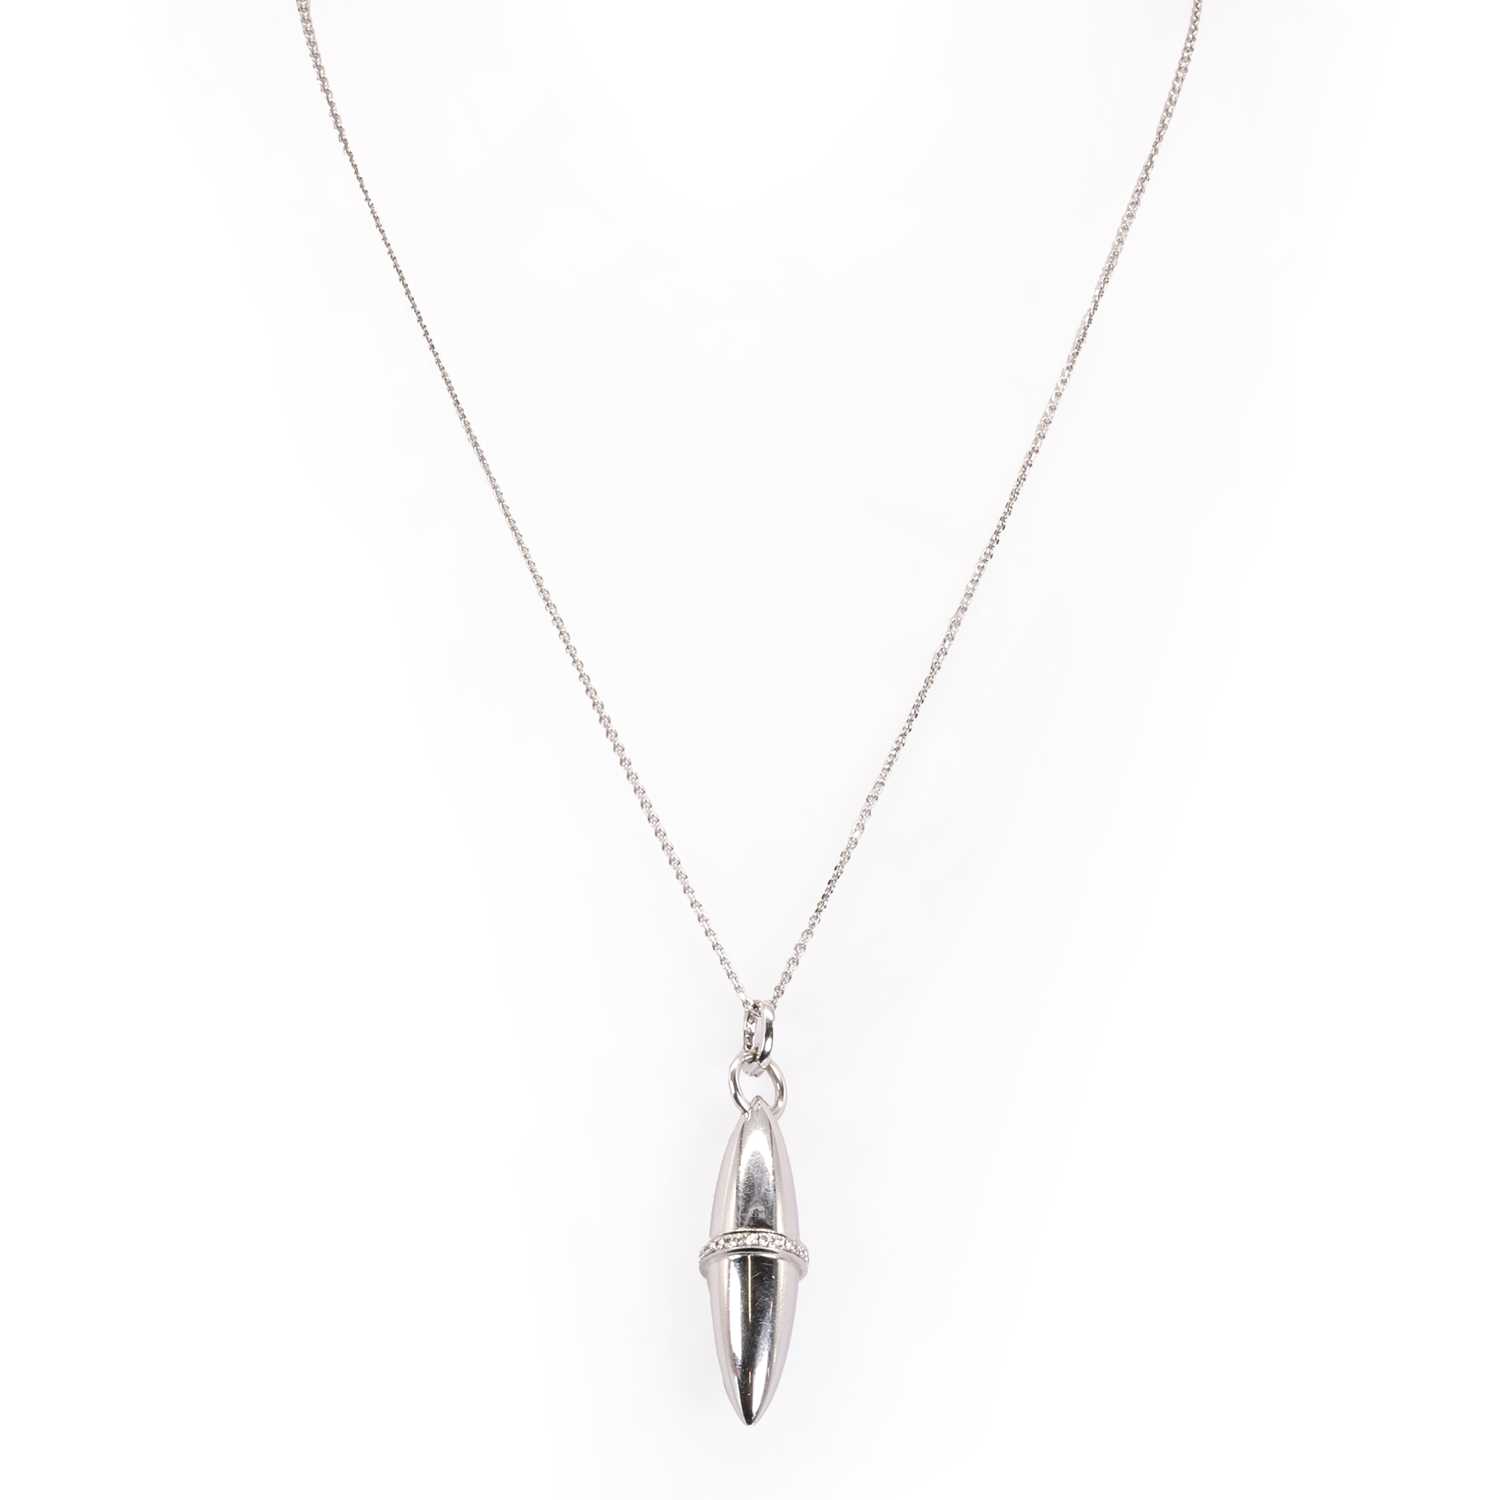 An 18ct white gold diamond 'Velocity' pendant, by Boodles, - Image 2 of 3